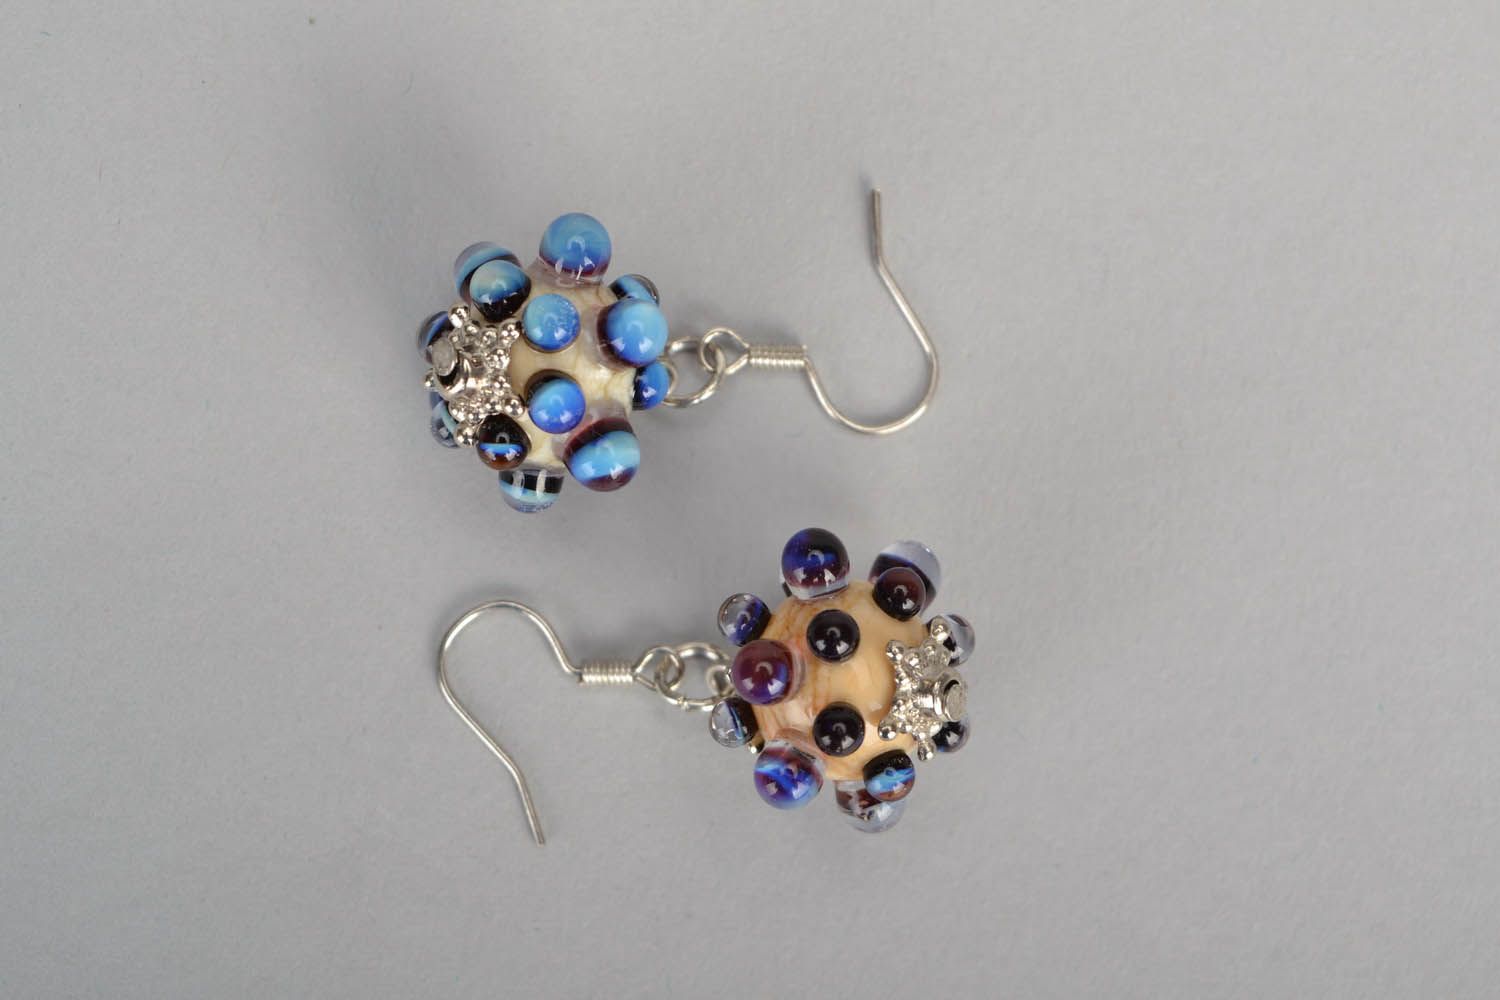 Earrings made using lampwork technique photo 3